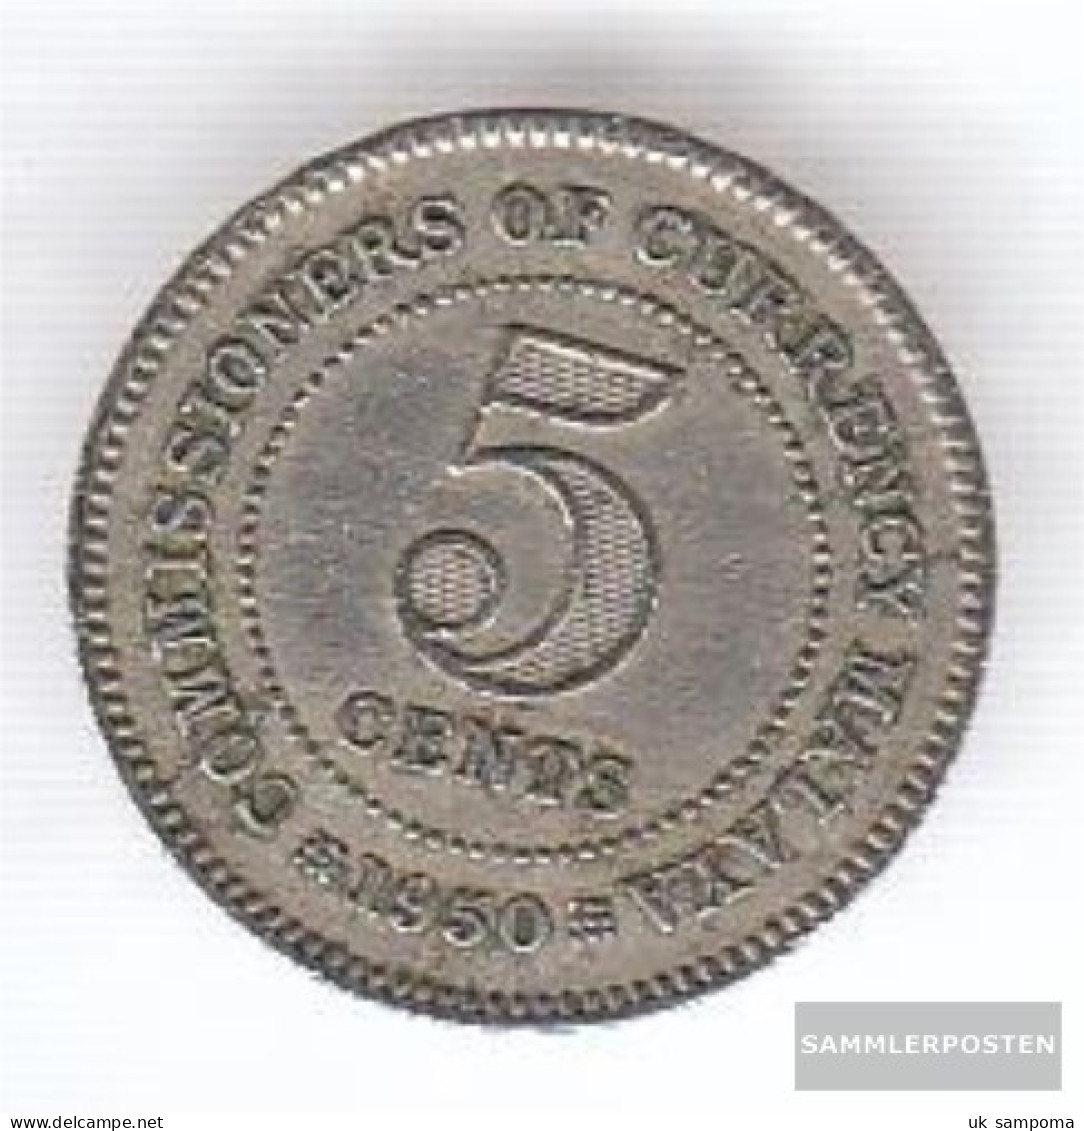 UK Administration Malaya Km.-number.: 7 1950 Very Fine Copper-Nickel Very Fine 1950 5 Cents George VI. - Colonias